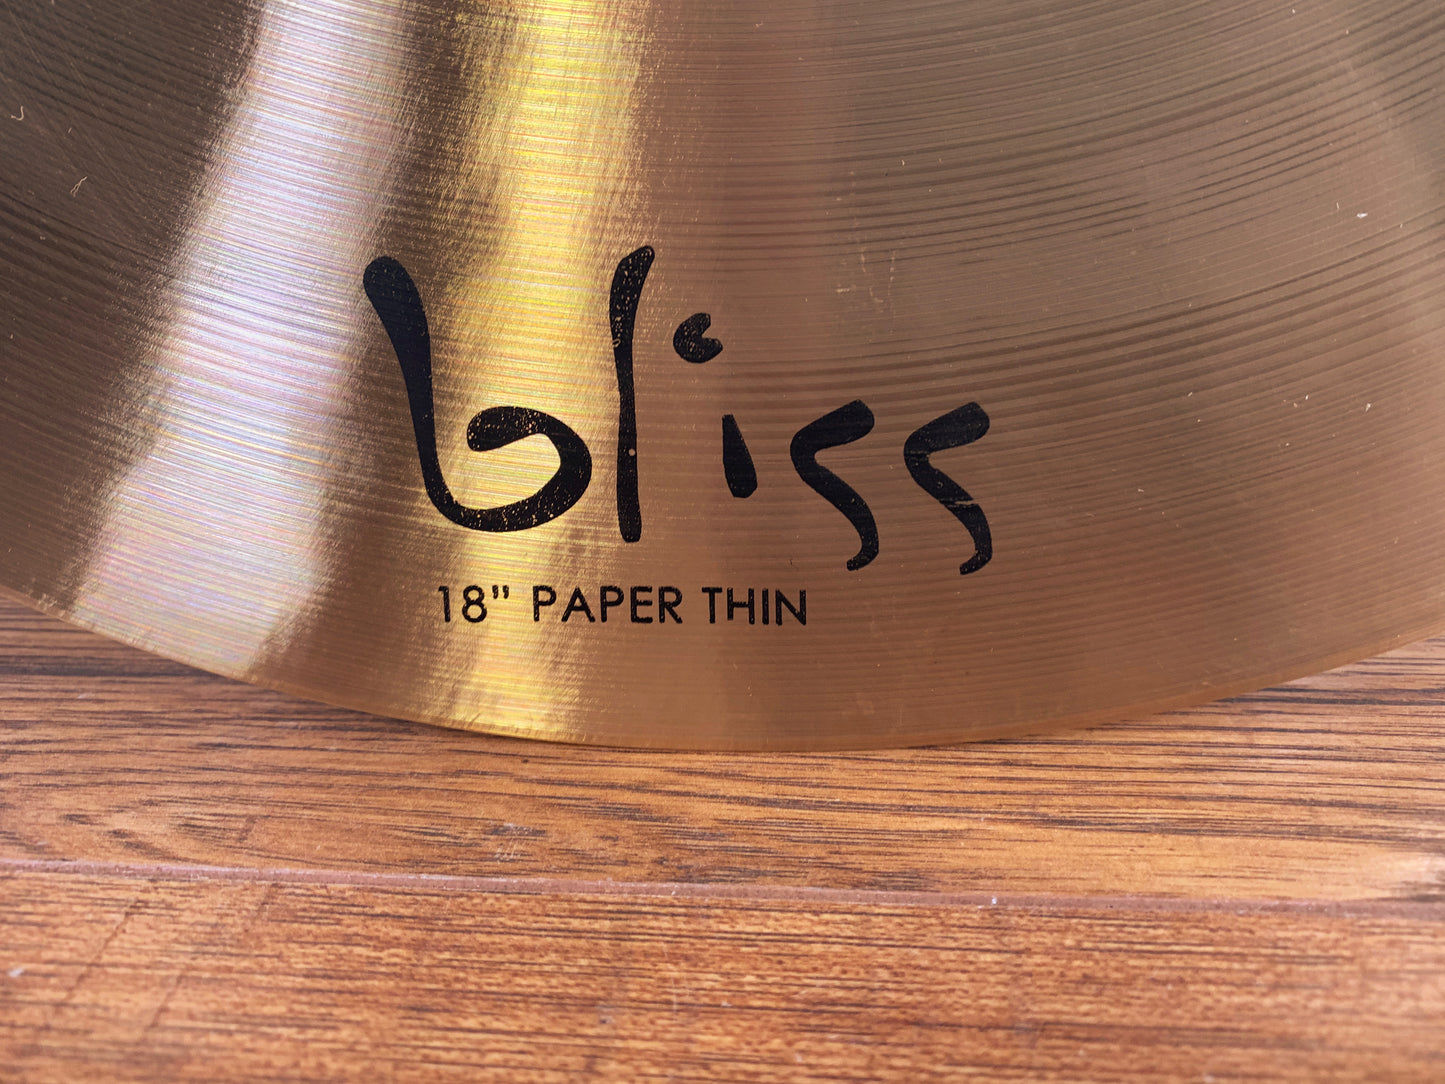 Dream Cymbals BPT18 Bliss Hand Forged & Hammered 18" Paper Thin Crash